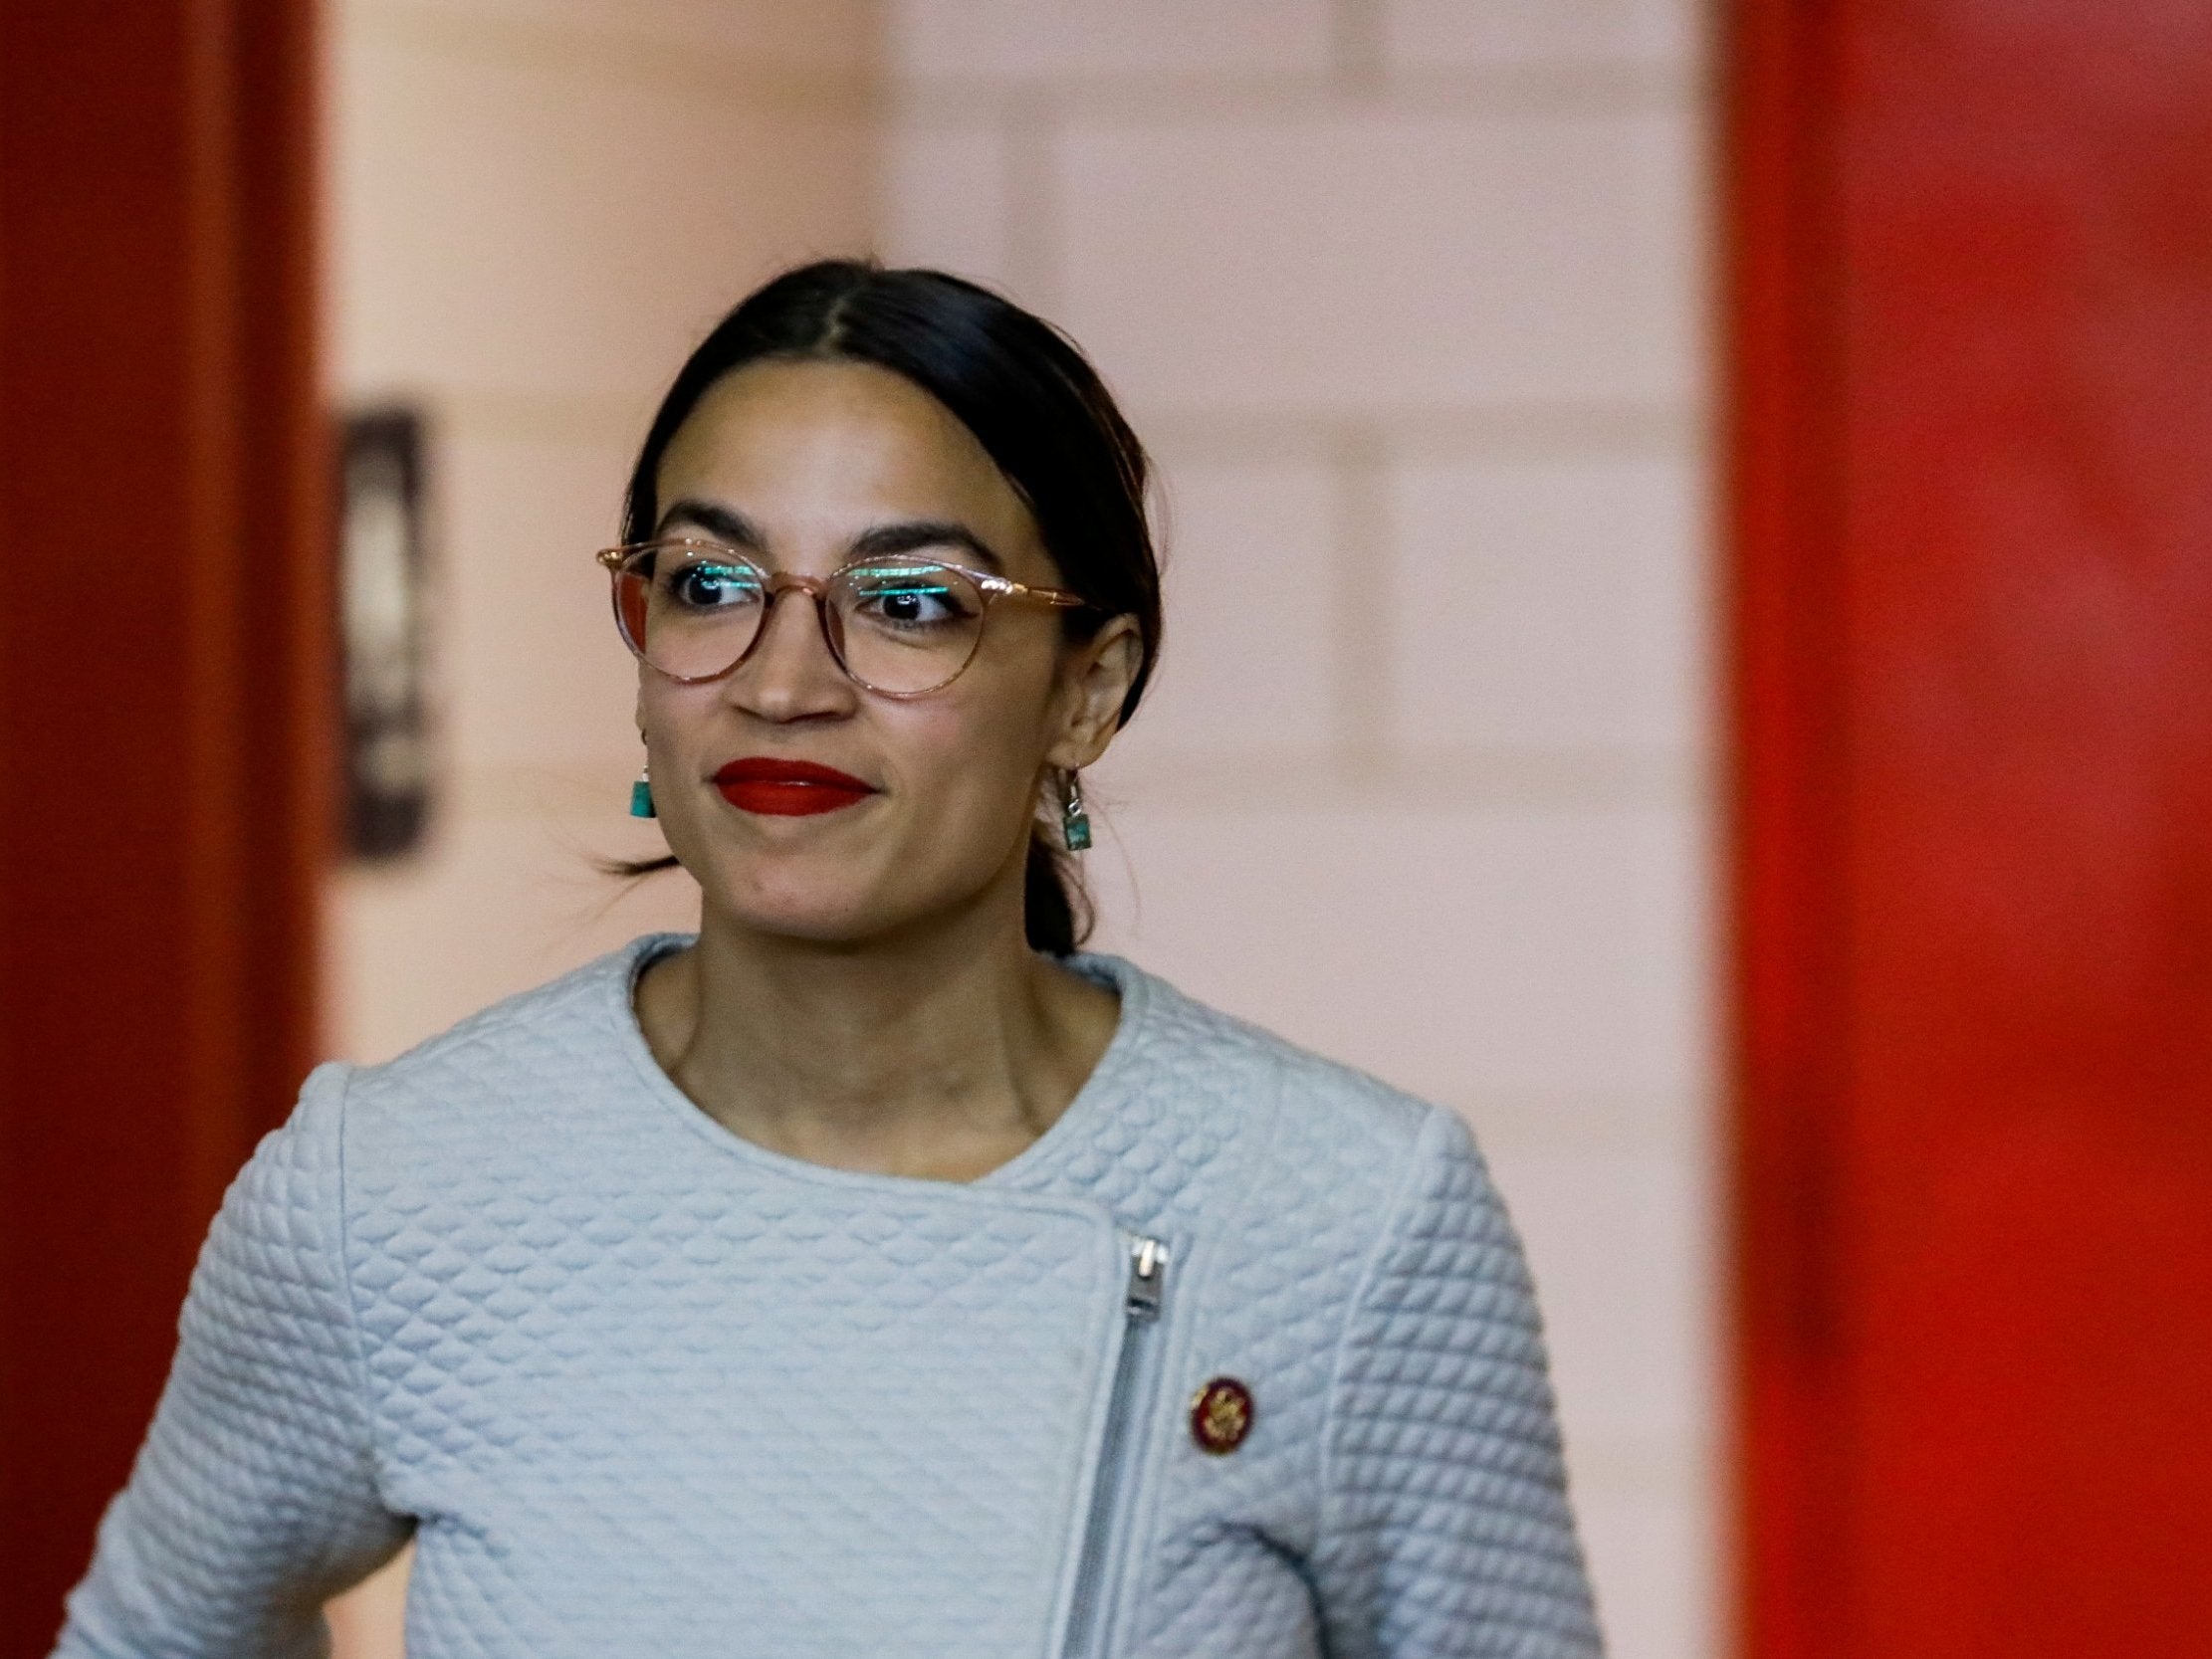 Alexandria Ocasio-Cortez arrives at a town hall meeting in the Queens borough of New York City, 27 April